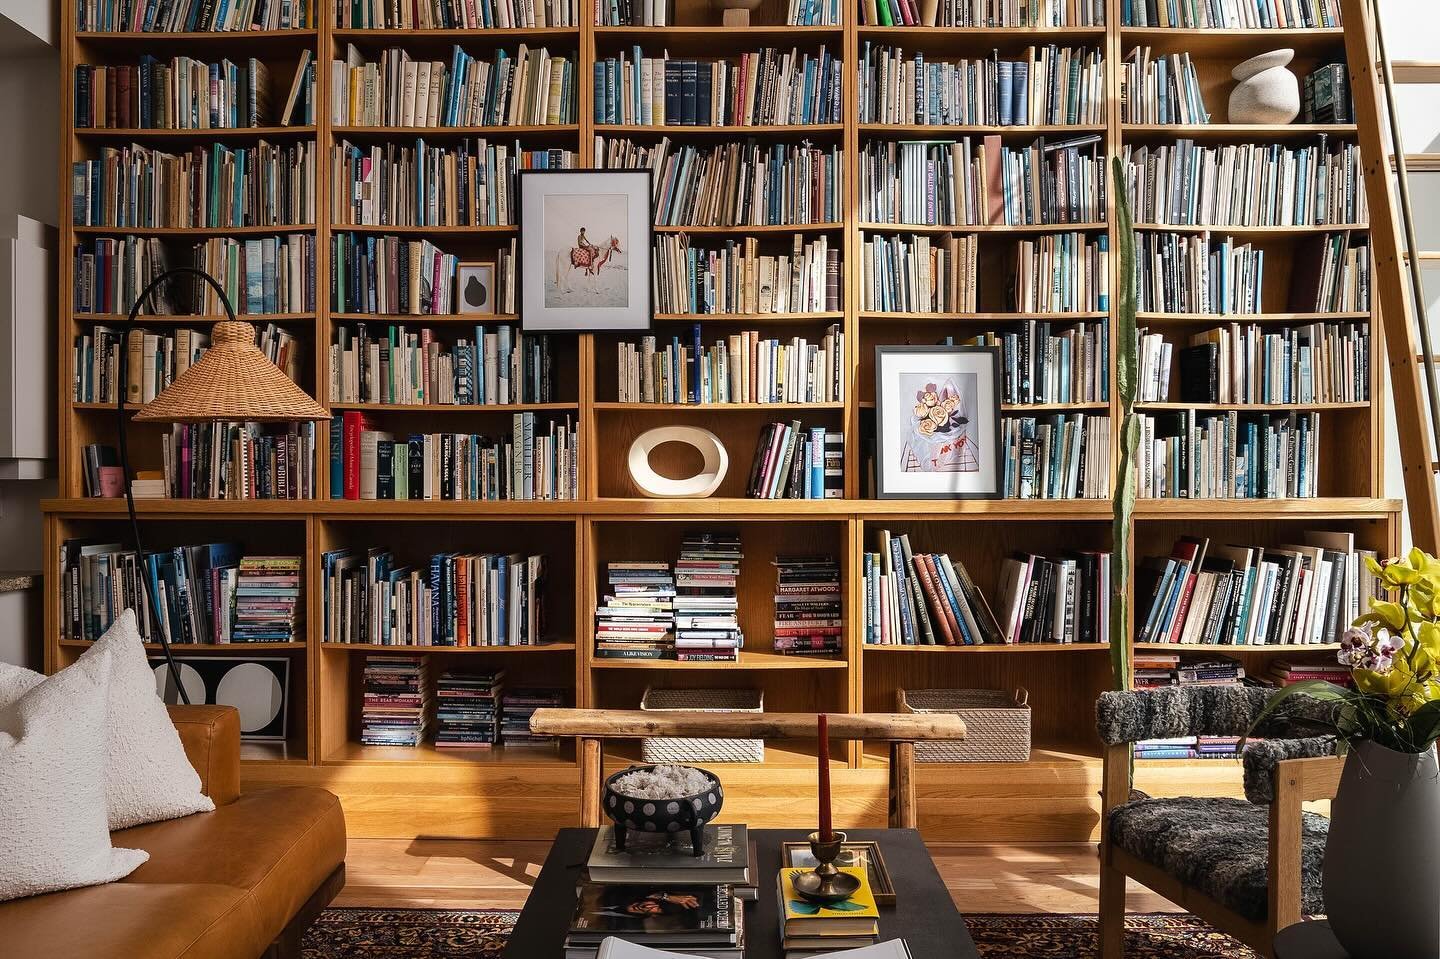 I can&rsquo;t get over this space&hellip; or this book collection. I&rsquo;m in love. 📚🥰
Something beautiful is coming soon&hellip; @brottco